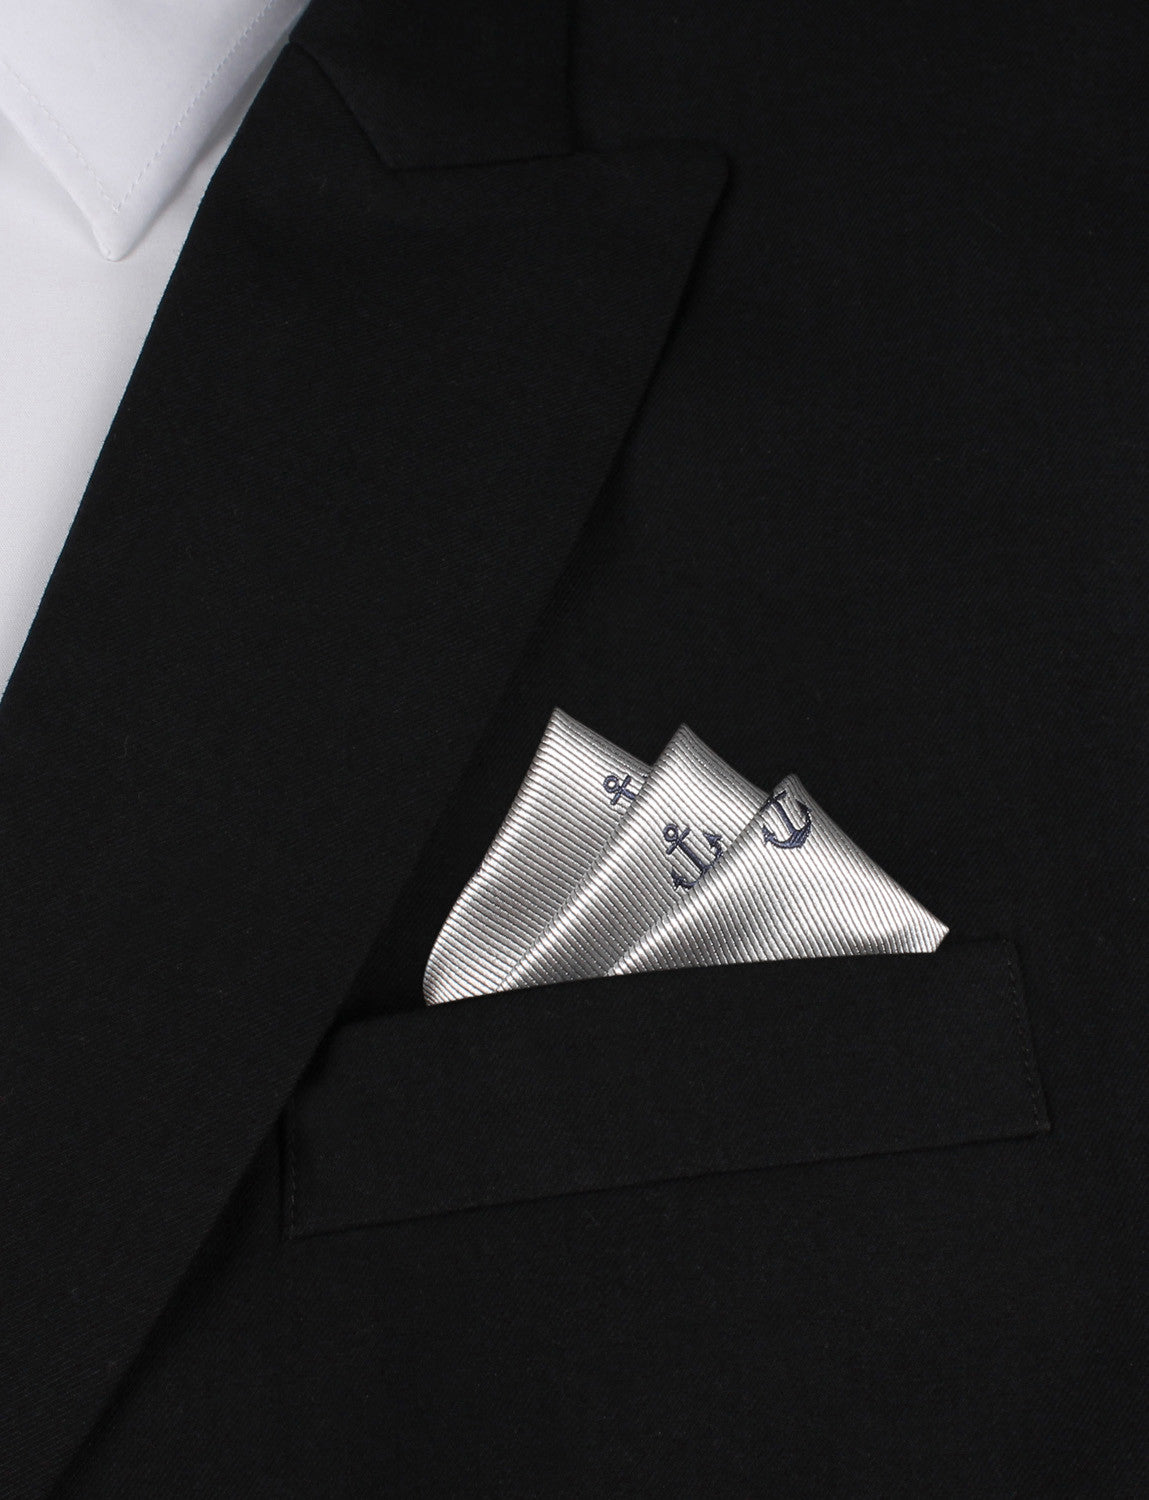 The OTAA Light Grey with Navy Blue Anchors Pocket Square